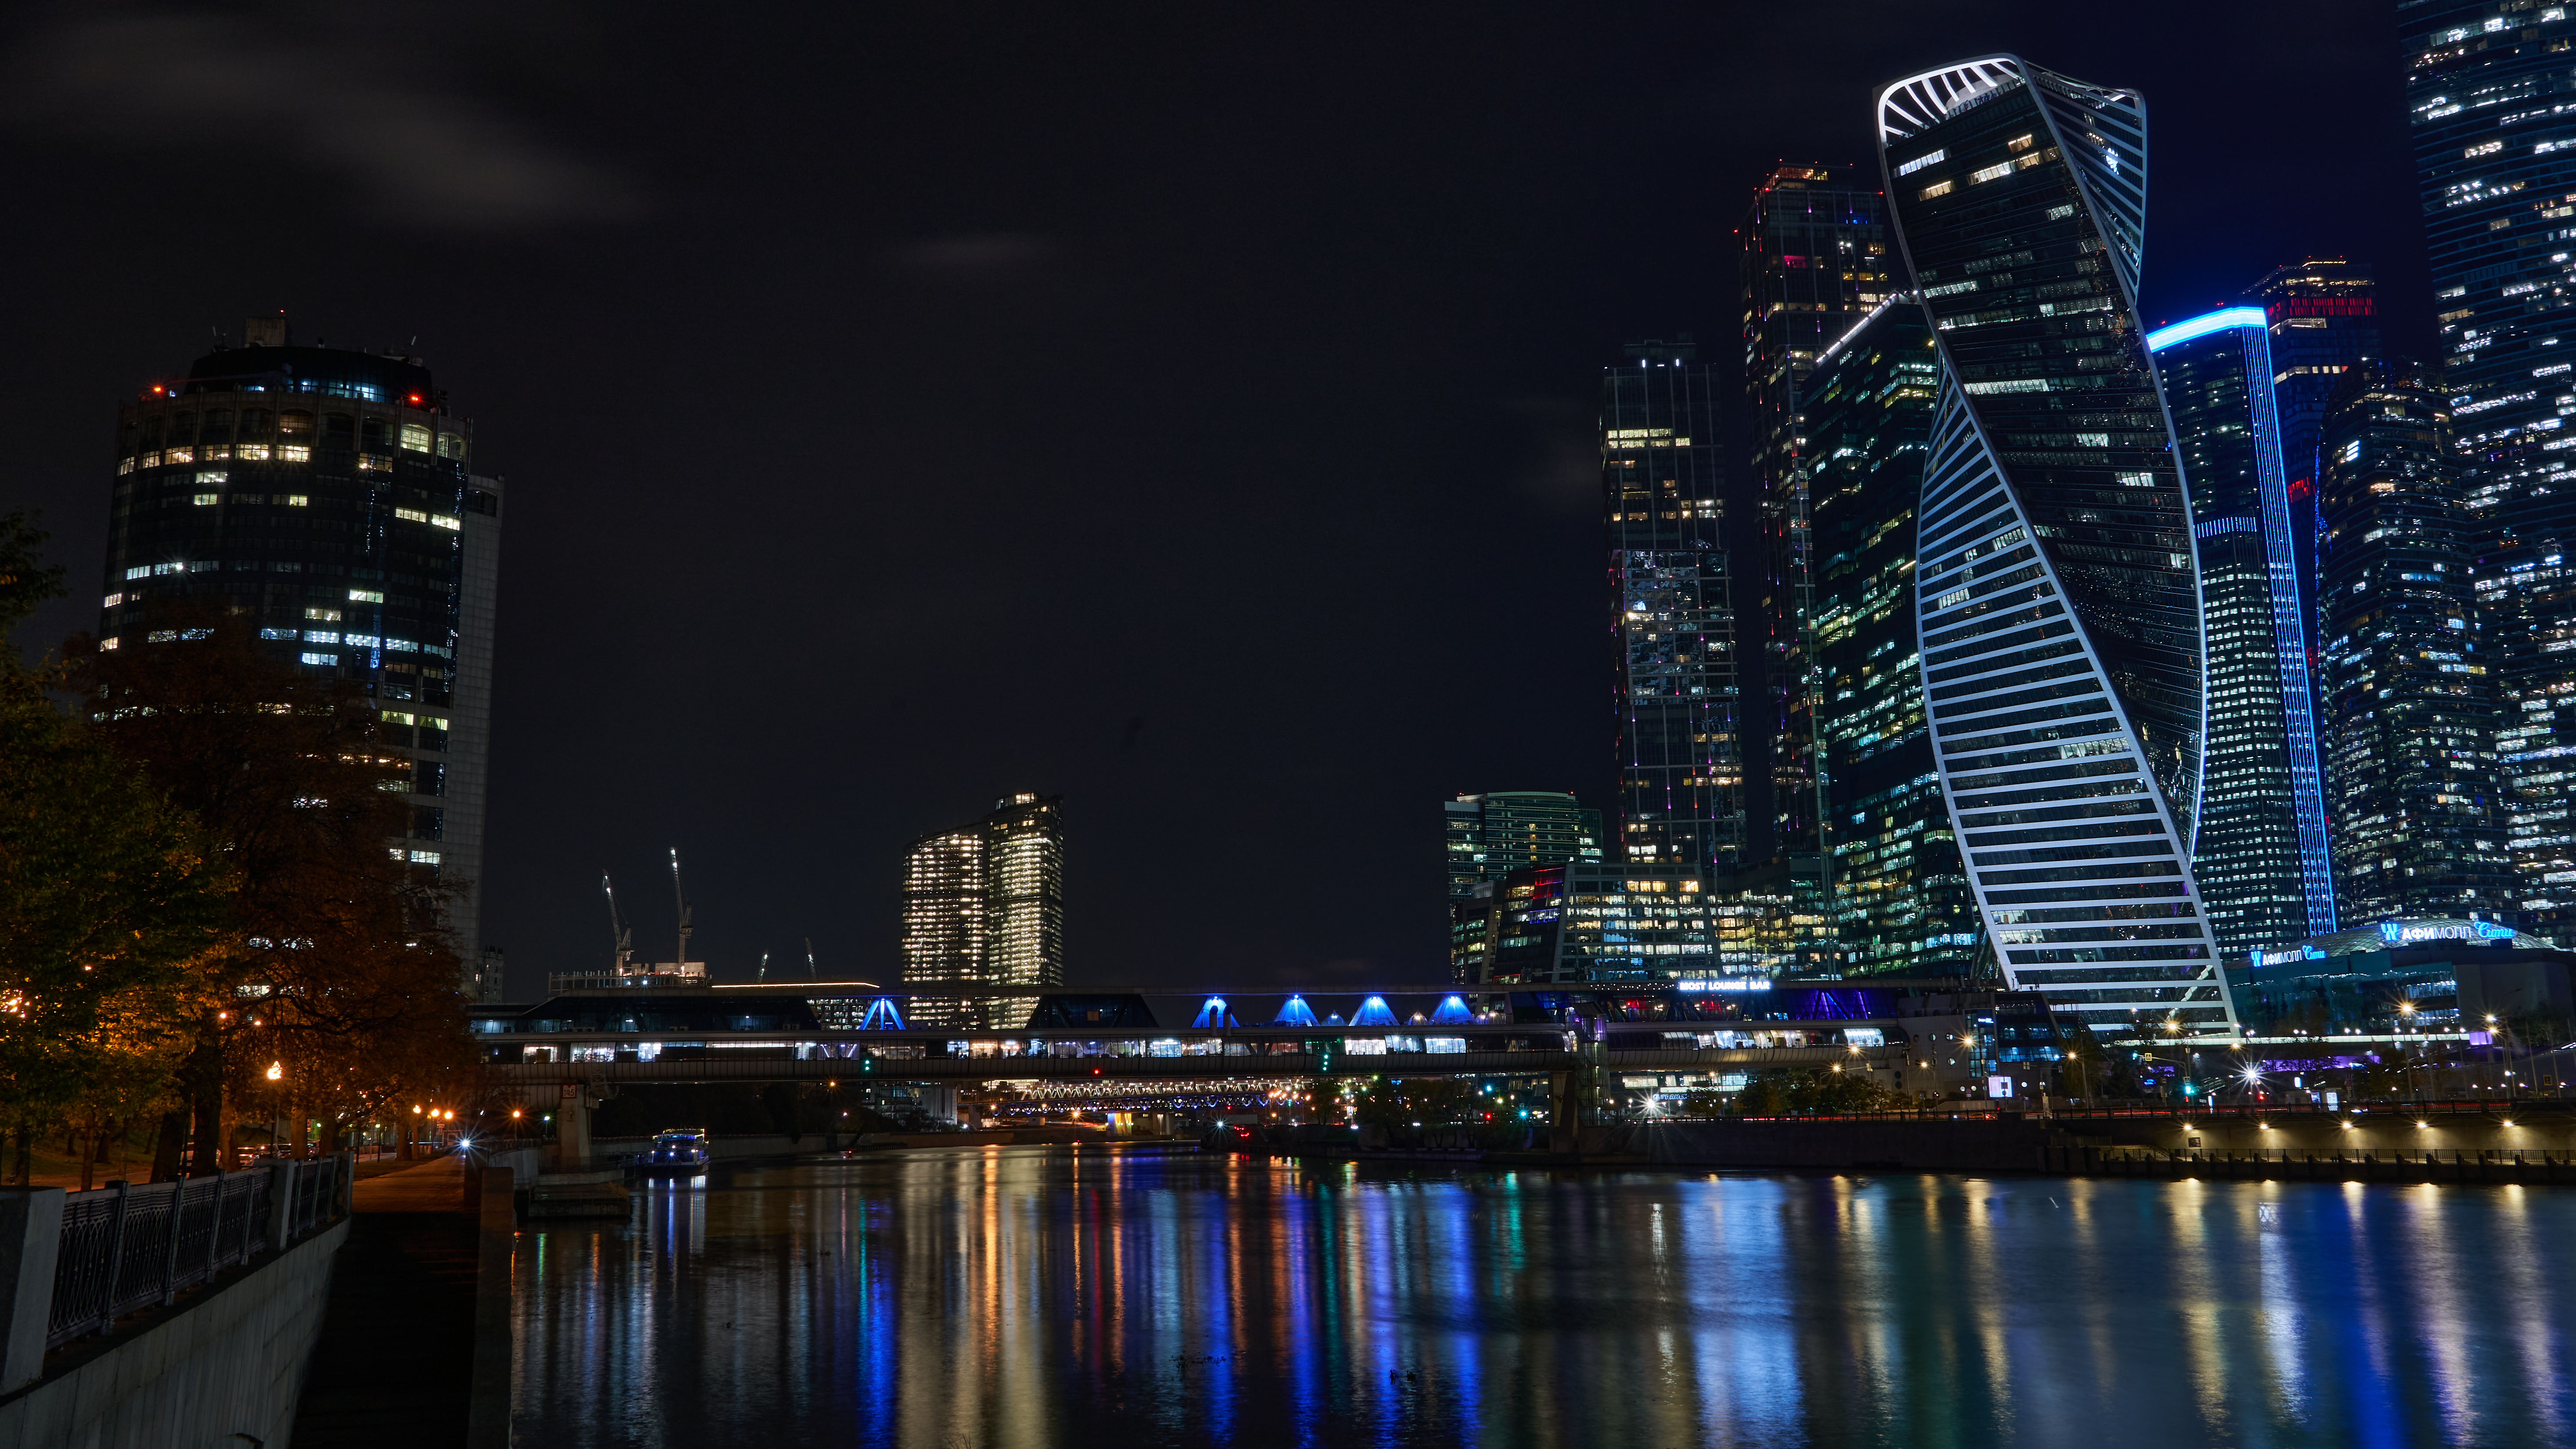 Moscow Building Architecture Modern Lights Russia City City Lights Night Water Photography River Sky 5869x3302